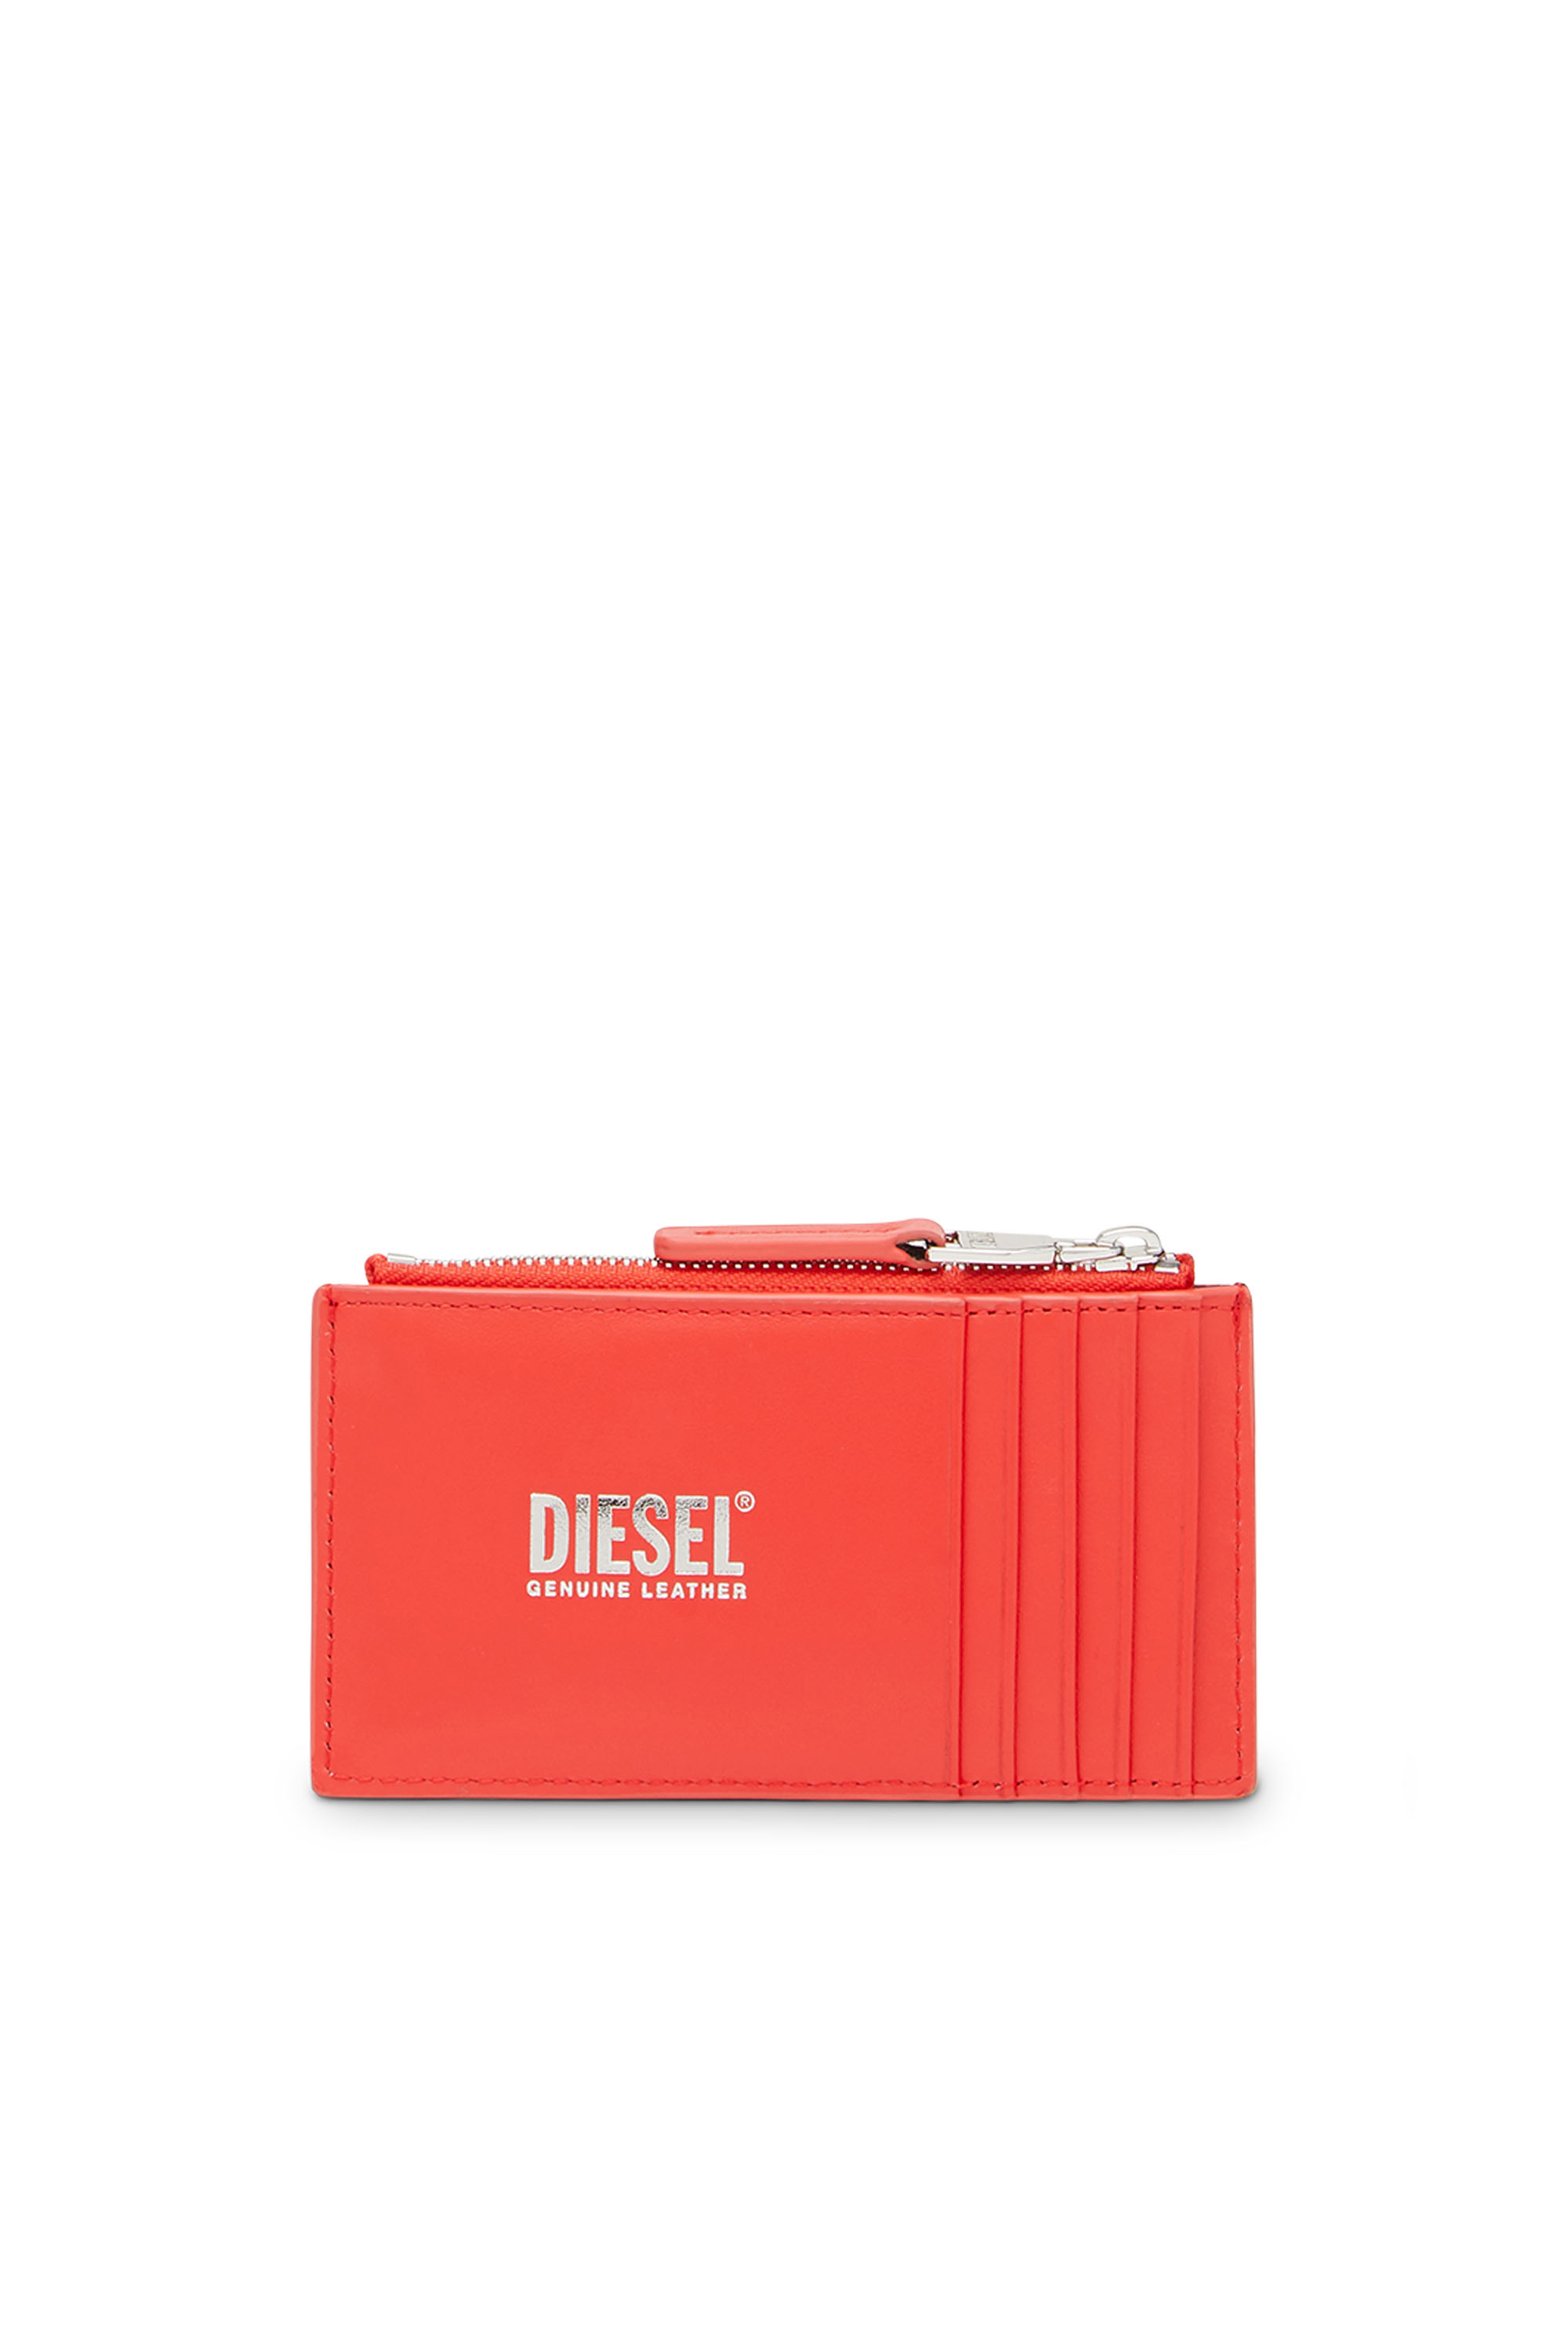 Diesel - PAOULINA, Red - Image 2